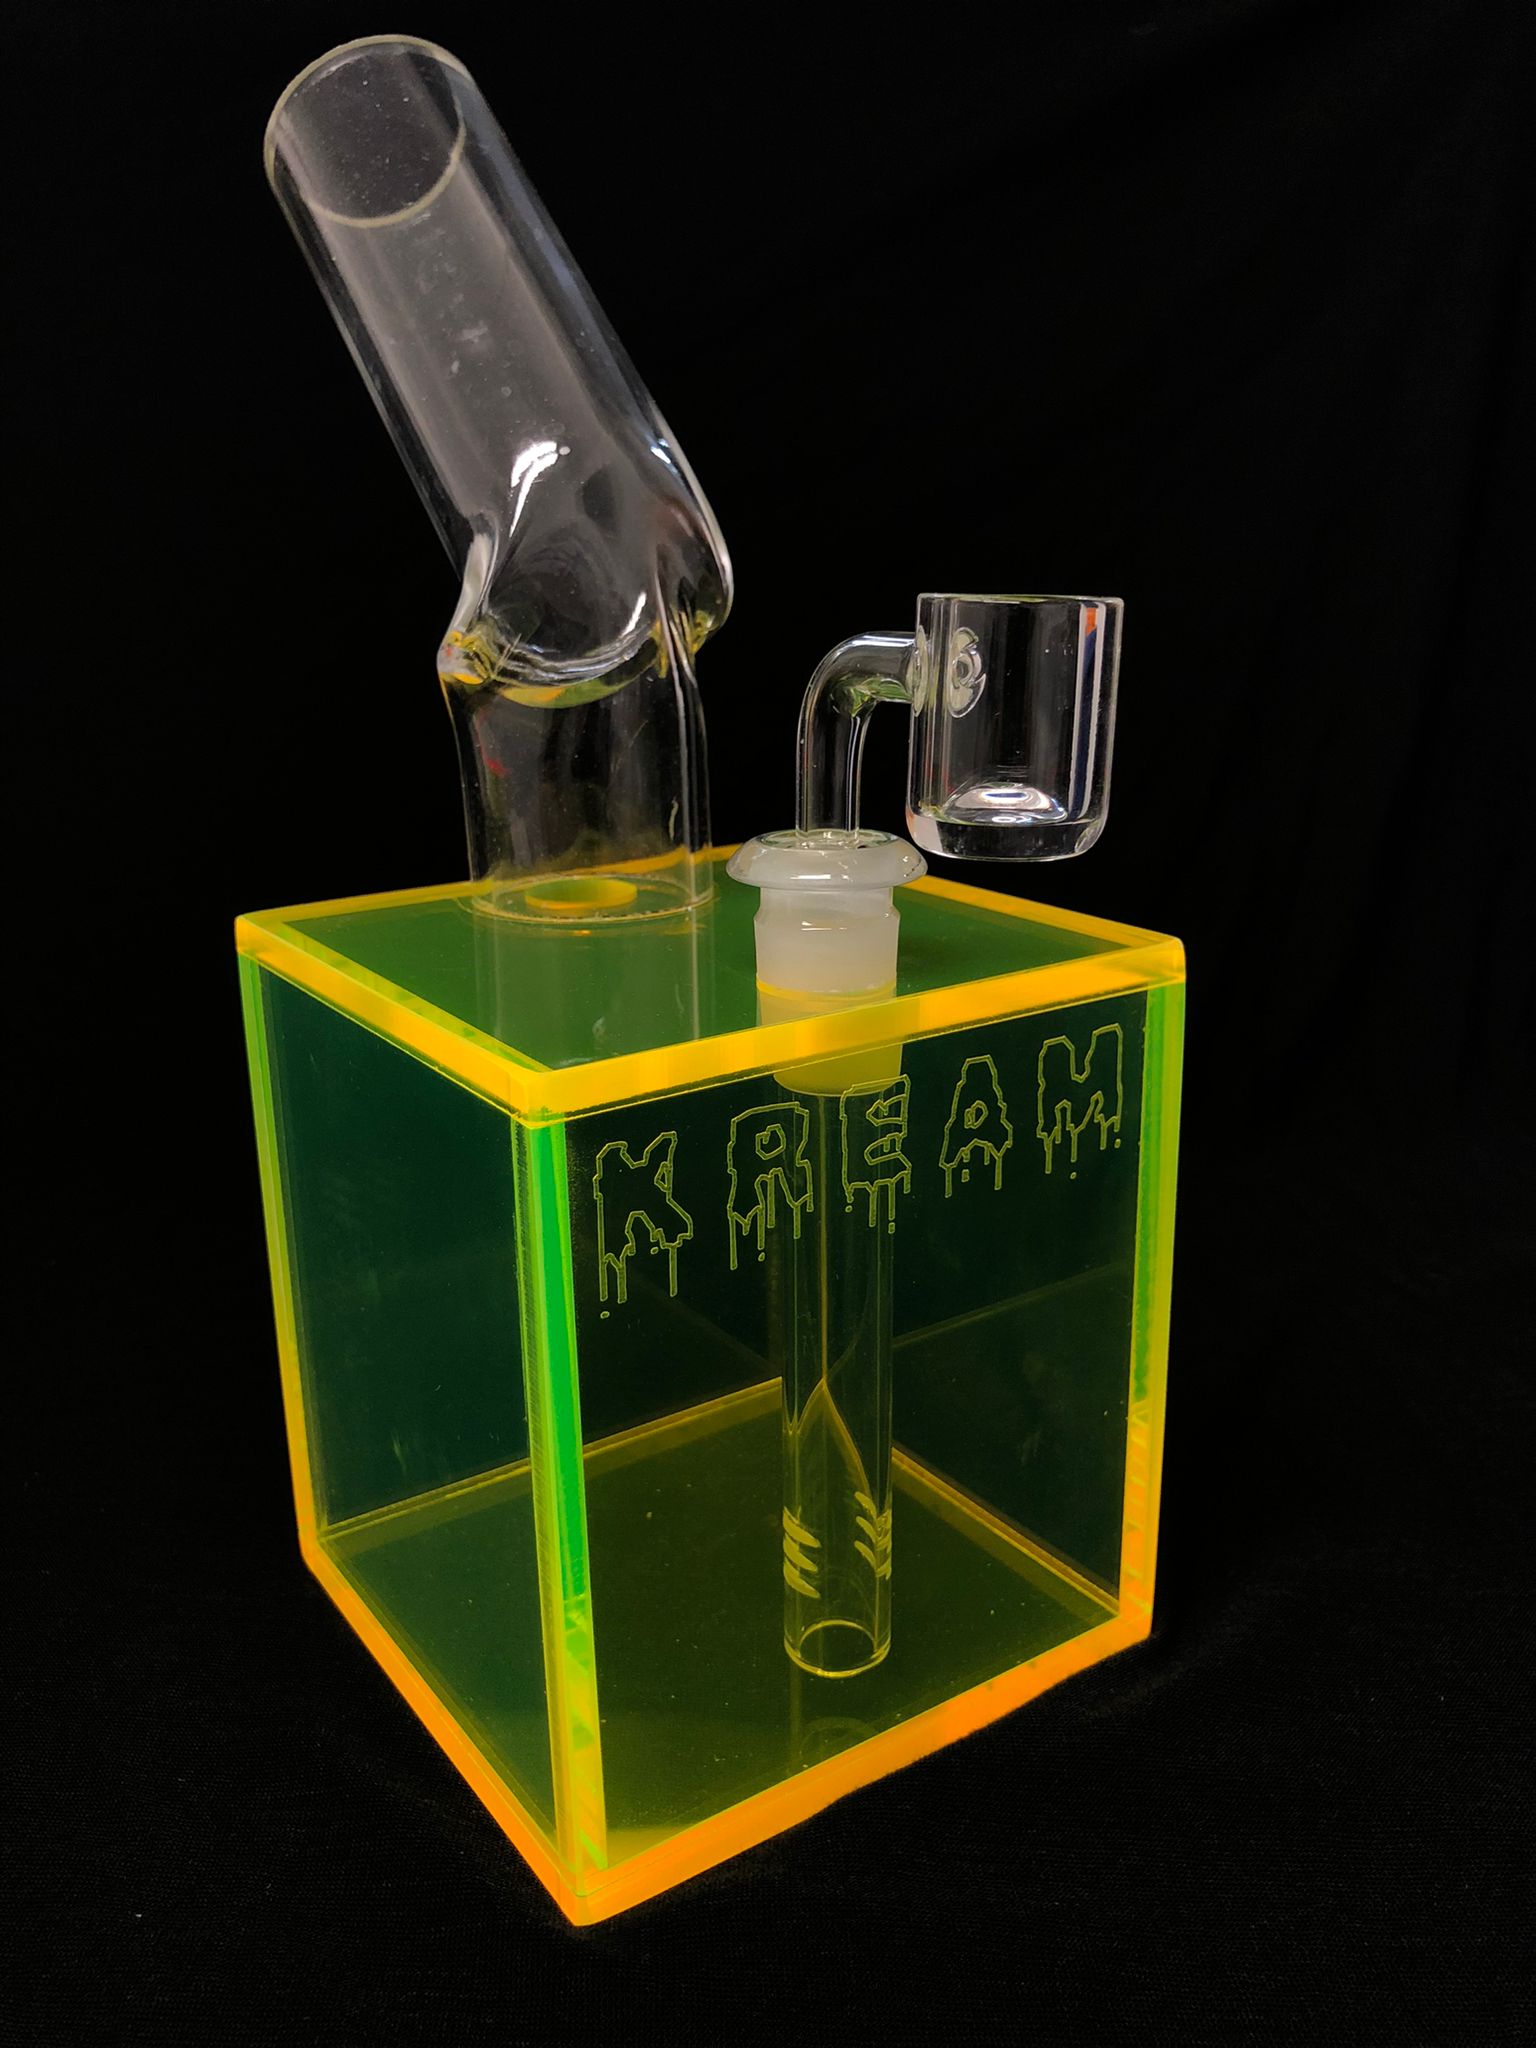 KREAM Exclusive Water Pipe